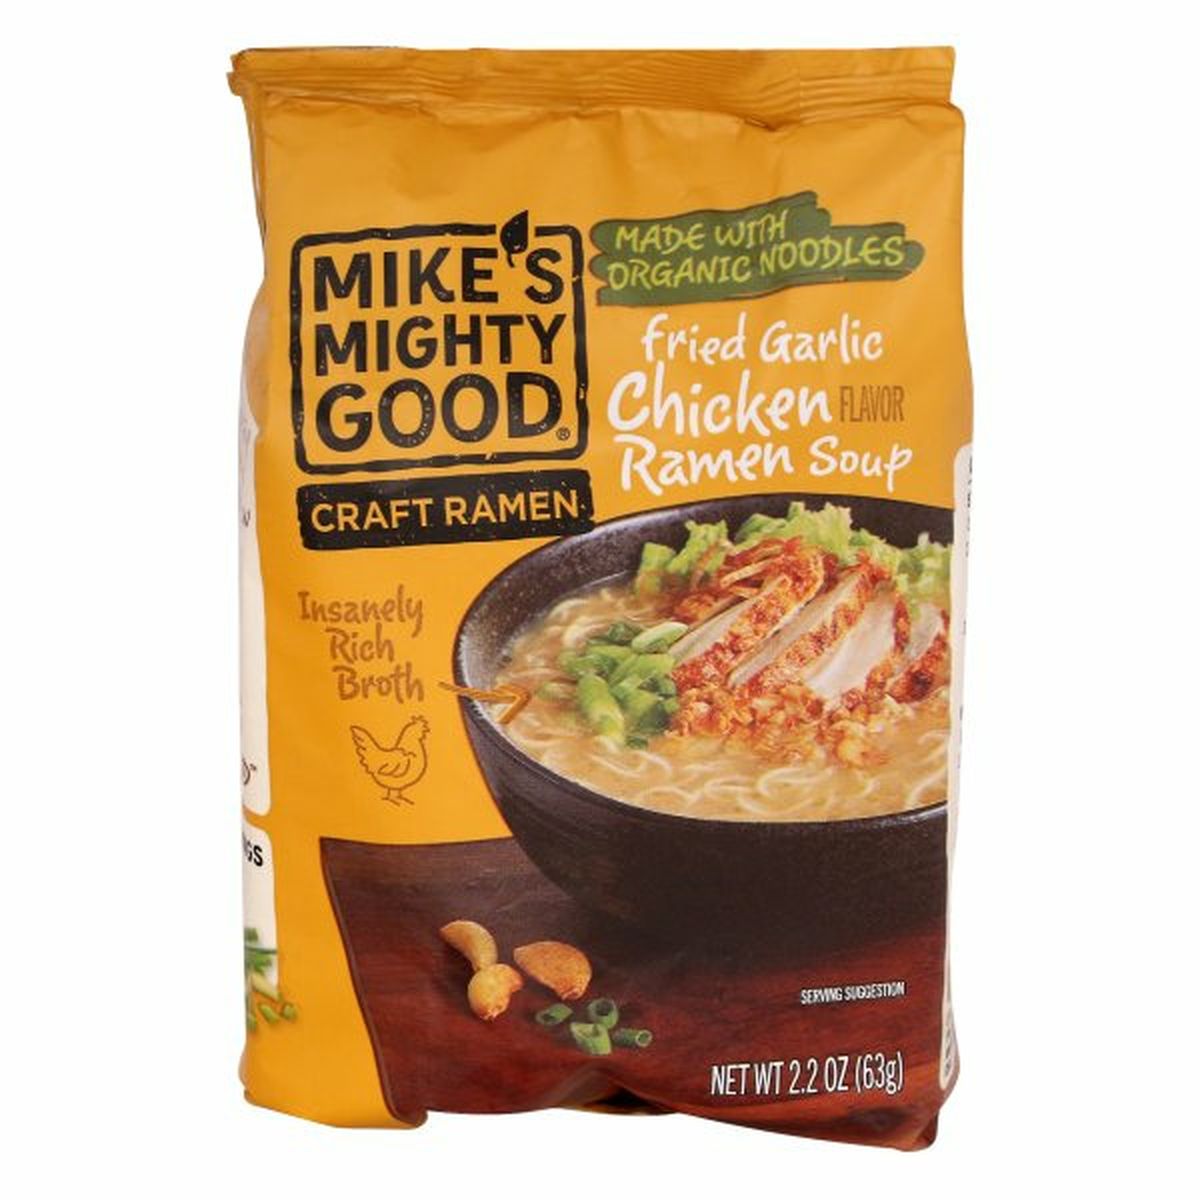 Calories in Mike's Mighty Good Ramen Soup, Fried Garlic Chicken Flavor